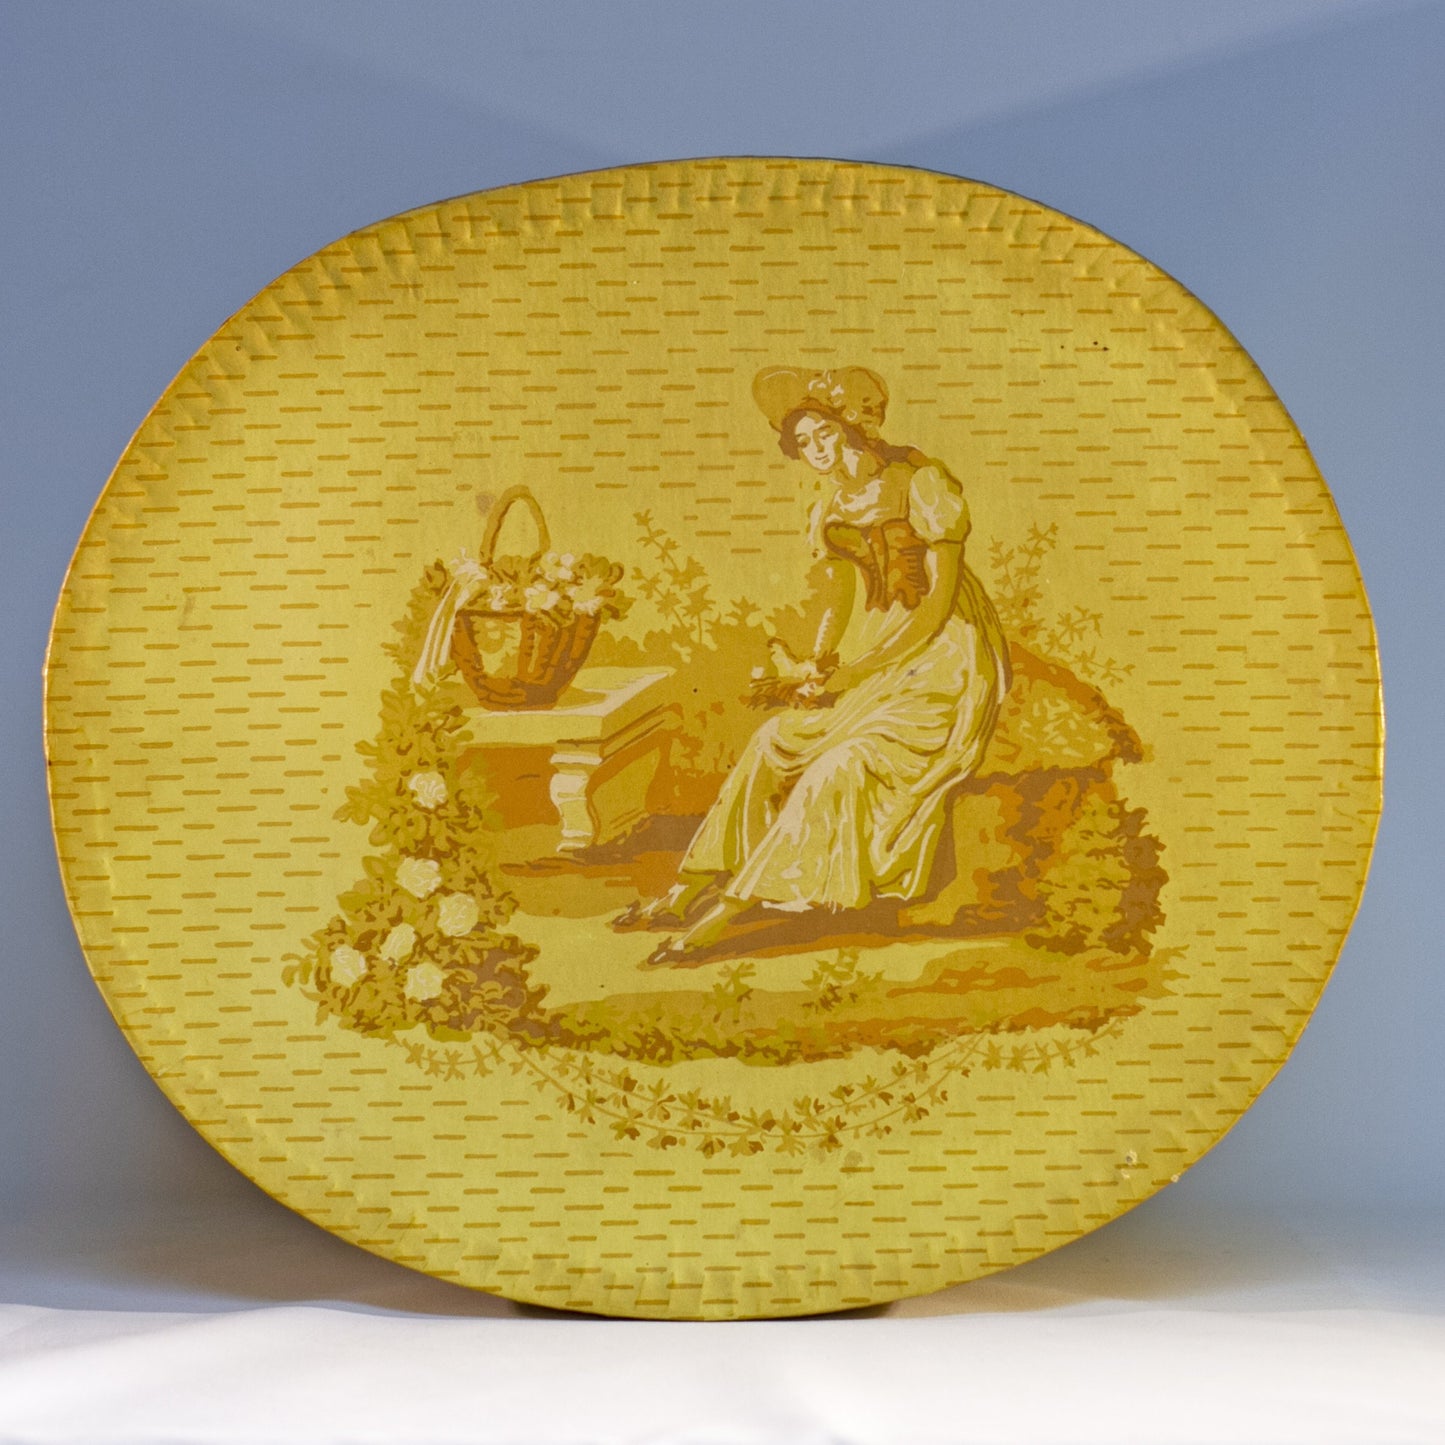 Reproduction of a "BRIDE'S BOX" made from slightly oval shaped large hat box covered in vintage yellow wallpaper featuring lambs and a Colonial girl. Inside and bottom papered with pages from the Maine Antique Digest, September 1977. Measures about 10" high by 15" in length by 13" wide.